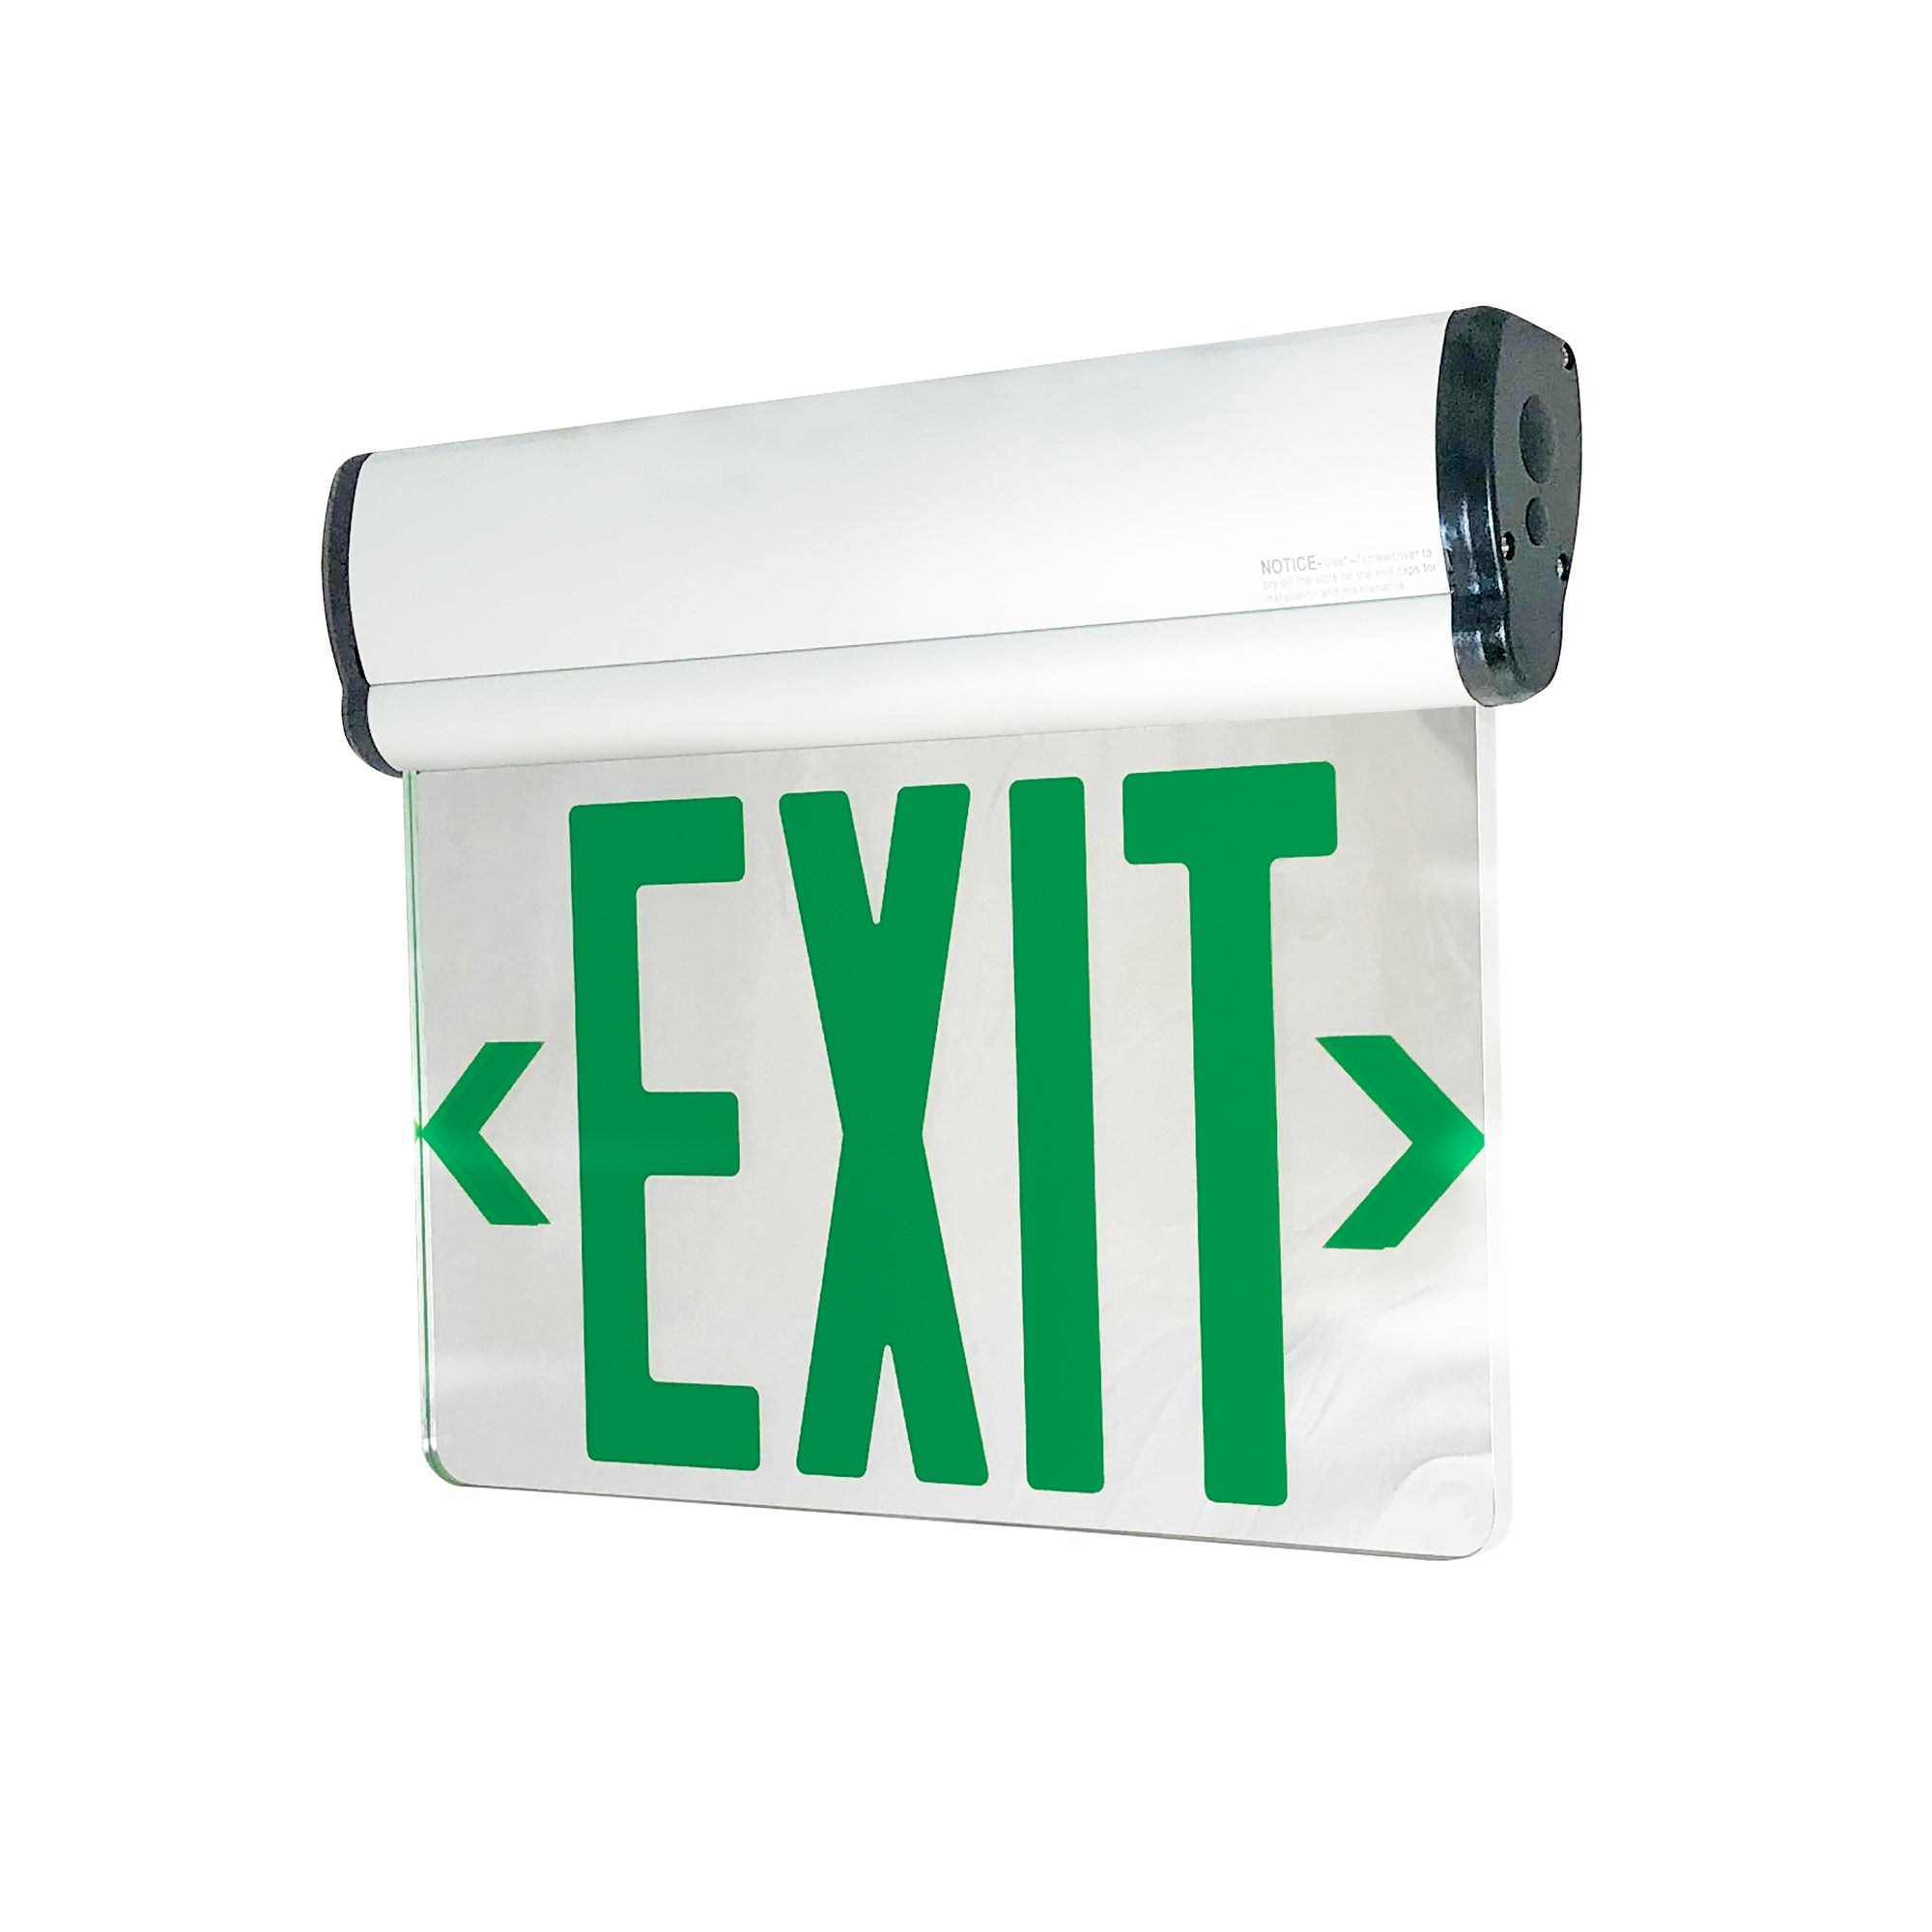 Nora Lighting NX-811-LEDG2MW - Exit / Emergency - Surface Adjustable LED Edge-Lit Exit Sign, 2 Circuit, 6 Inch Green Letters, Double Face / Mirrored Acrylic, White Housing